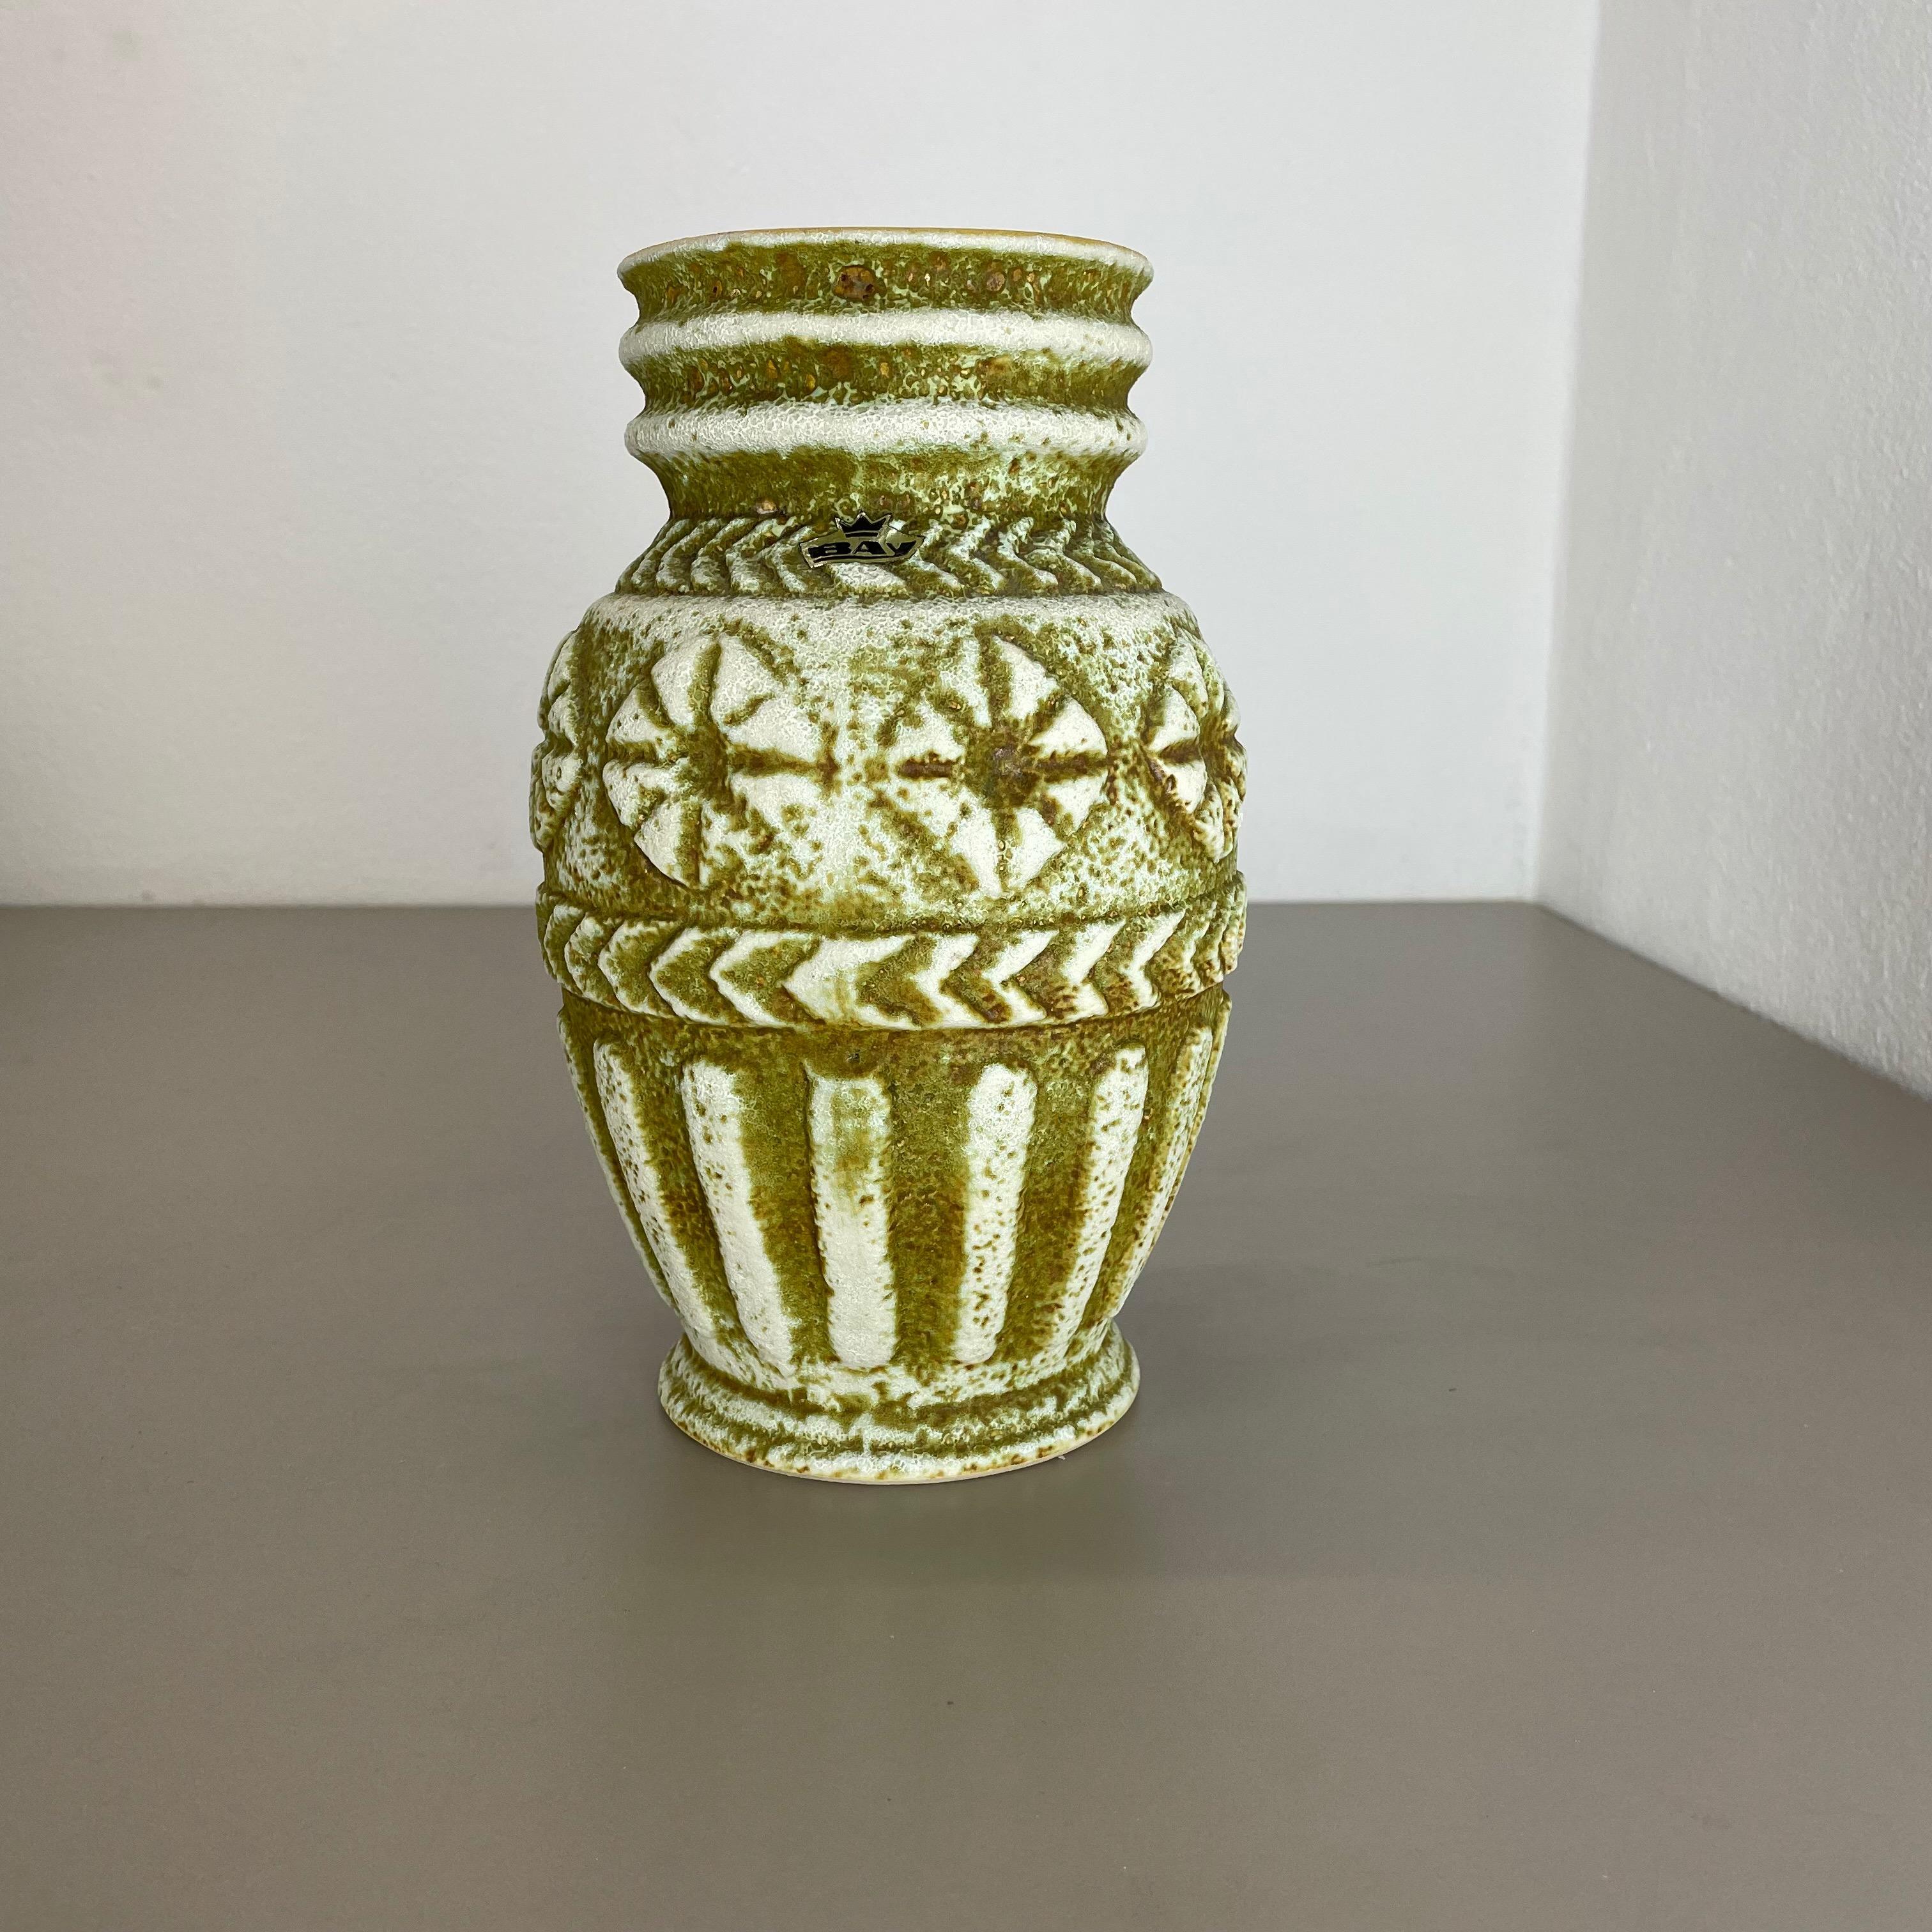 Article:

Pottery ceramic vase


Producer:

BAY Ceramic, Germany



Decade:

1970s



Description:

Original vintage 1970s pottery ceramic vase made in Germany. High quality German production with a nice abstract painting and